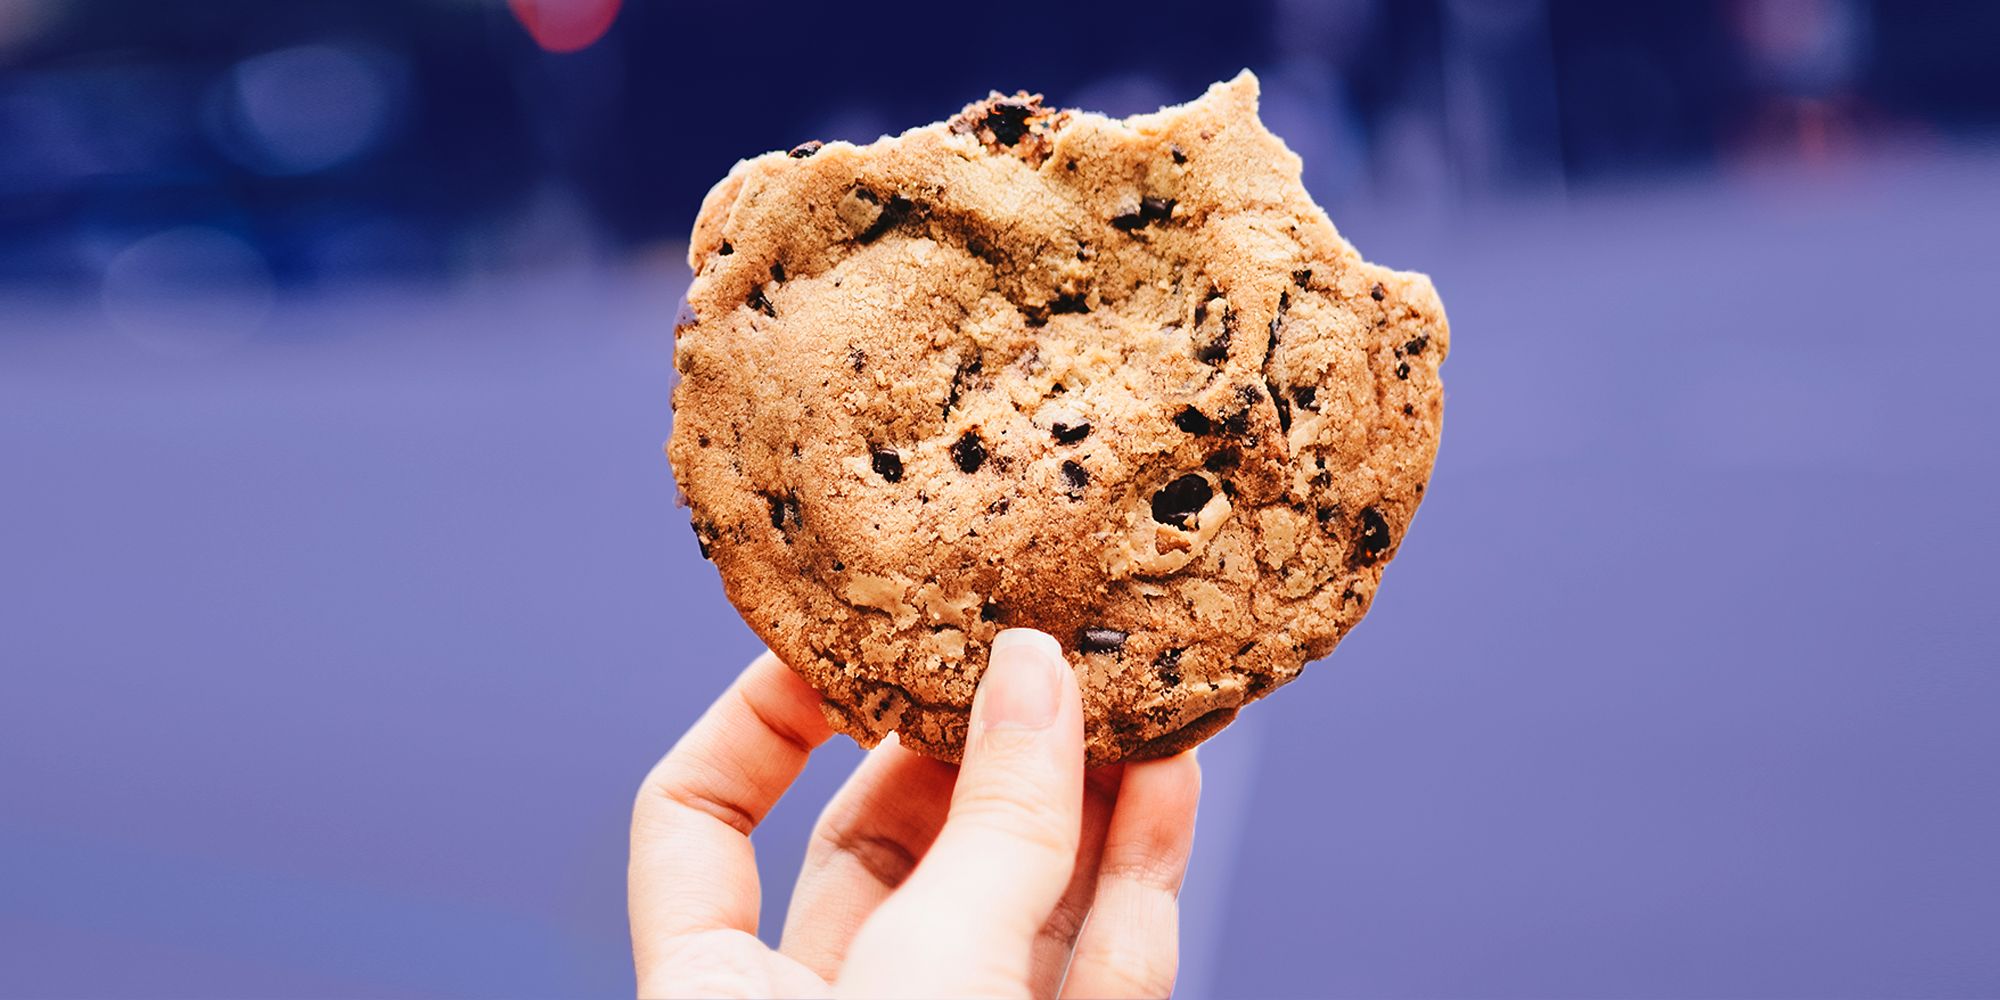 15 Best Chocolate Chip Cookie Brands To Buy In 21 Best Store Bought Chocolate Chip Cookies